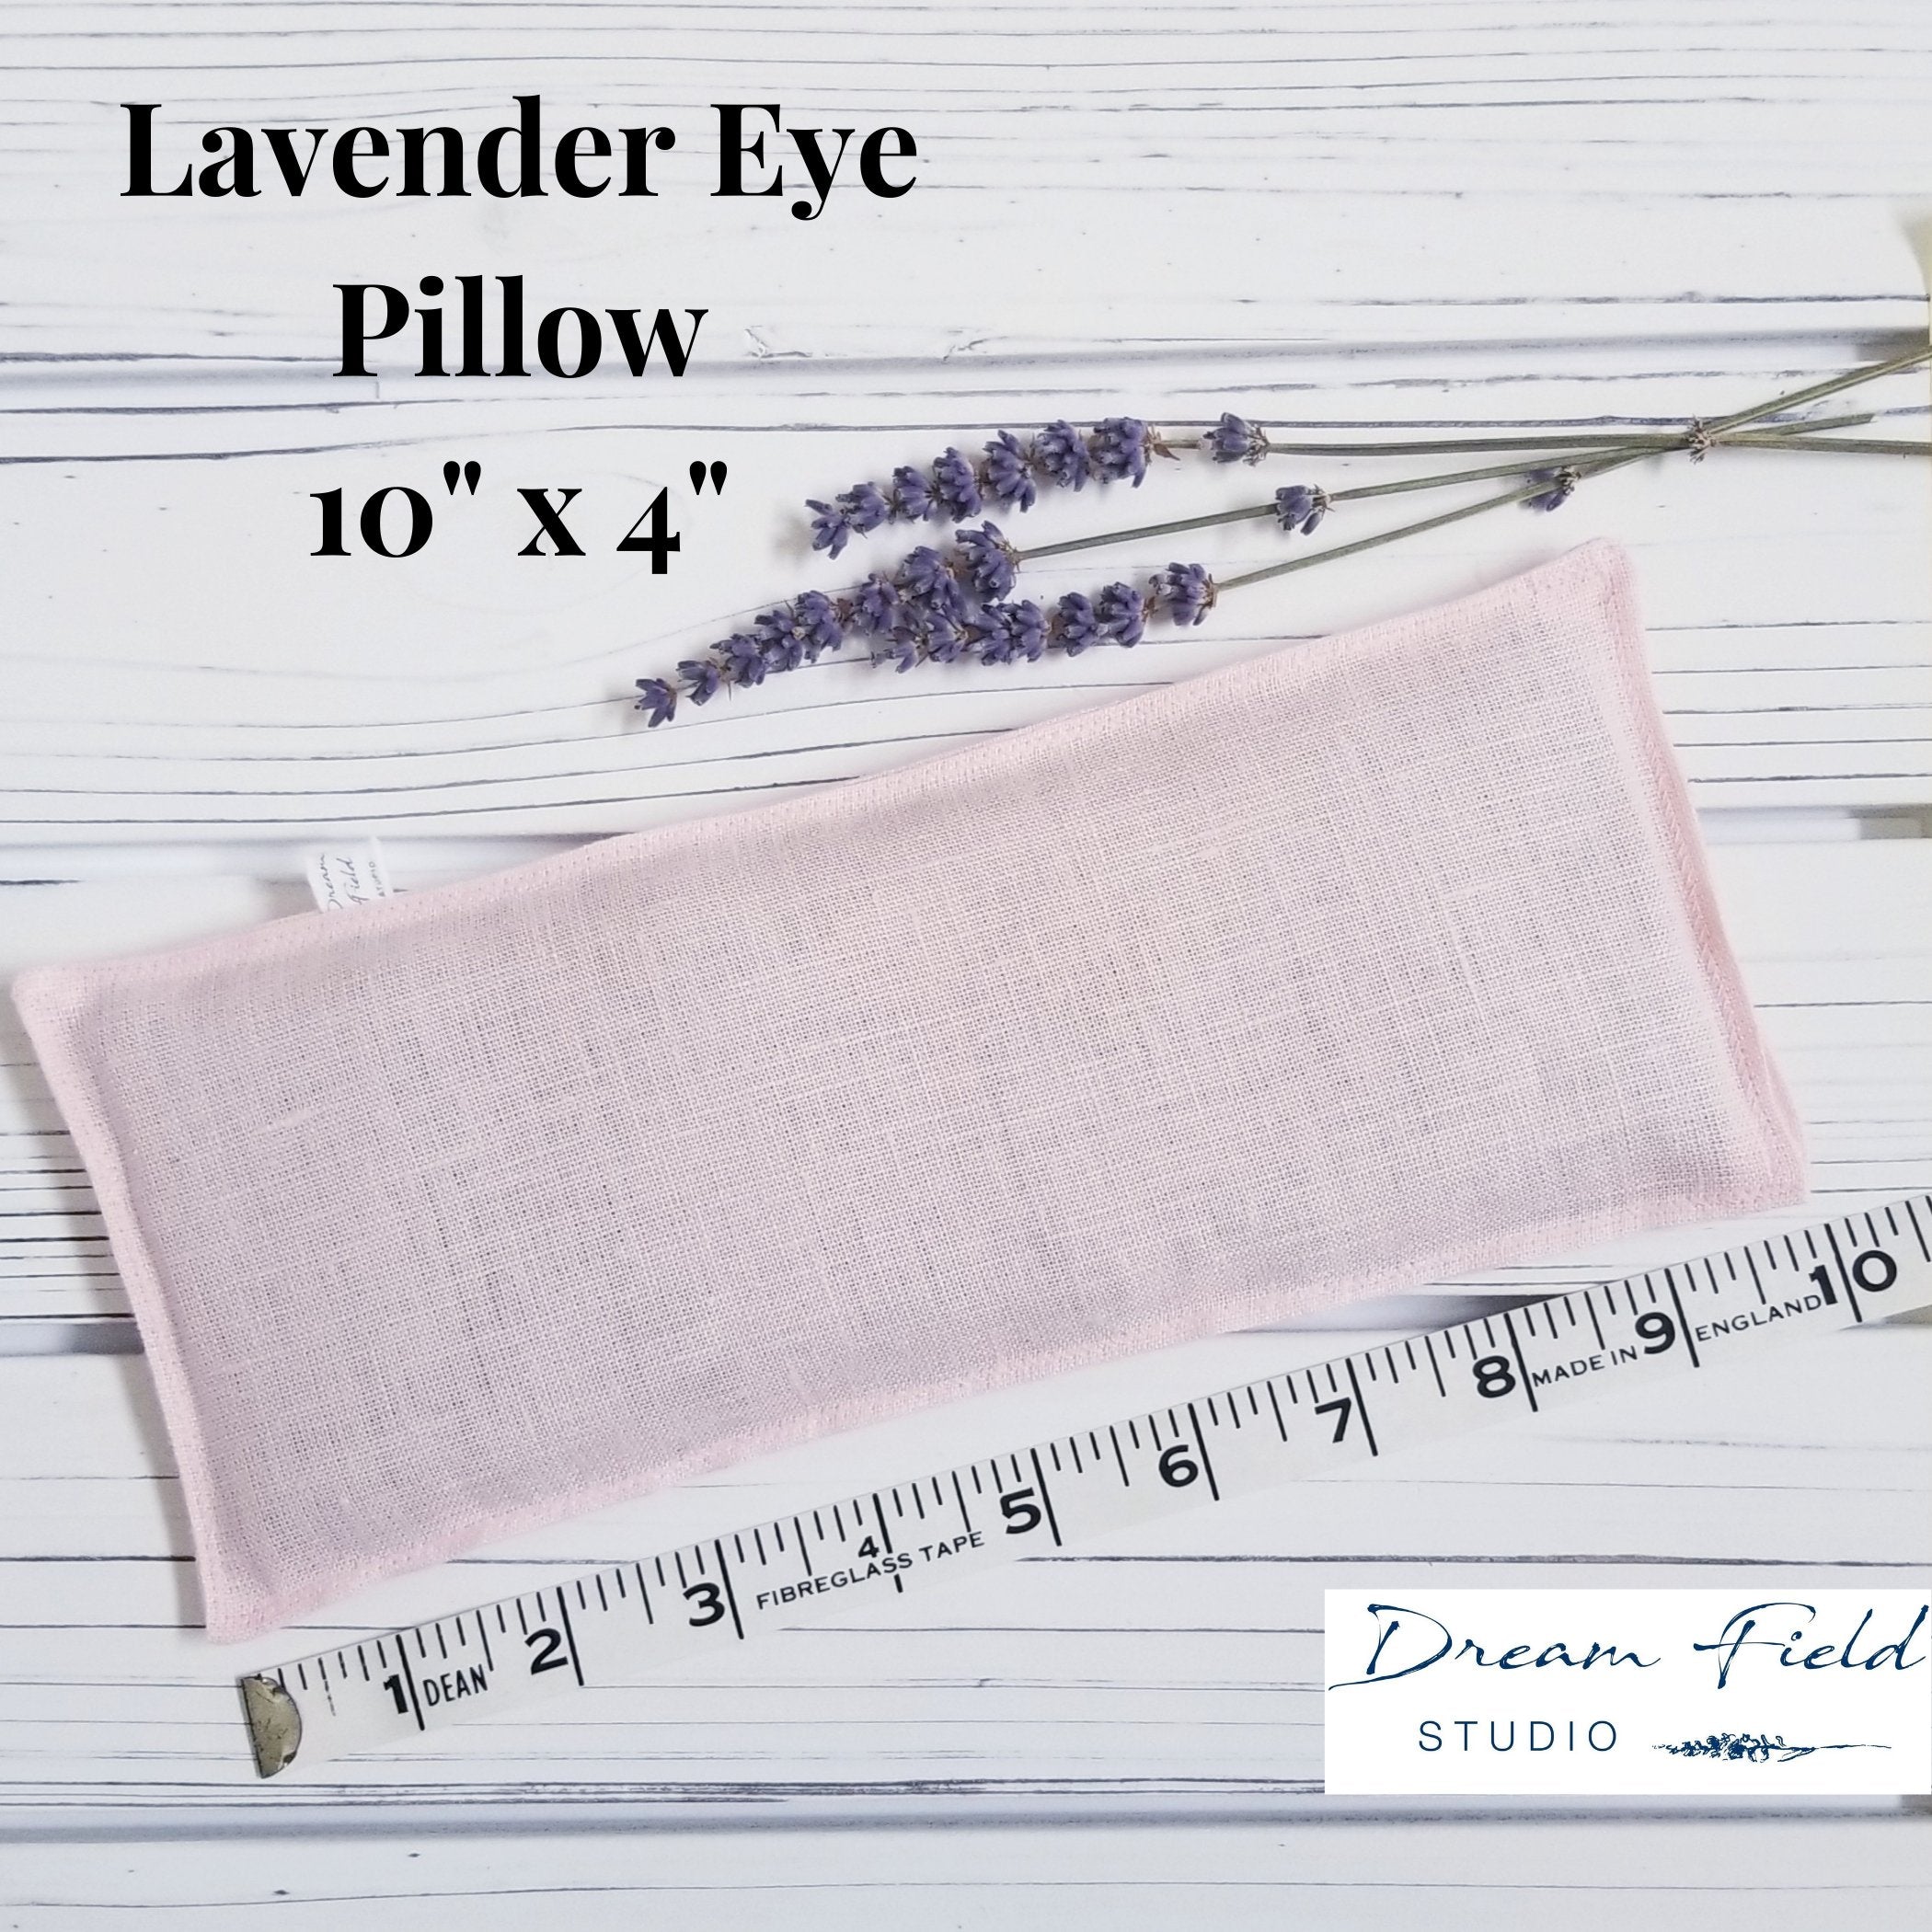 Size specifications for 10" x 4" lavender eye pillow and sprig of fresh organic lavender by Dream Field Studio